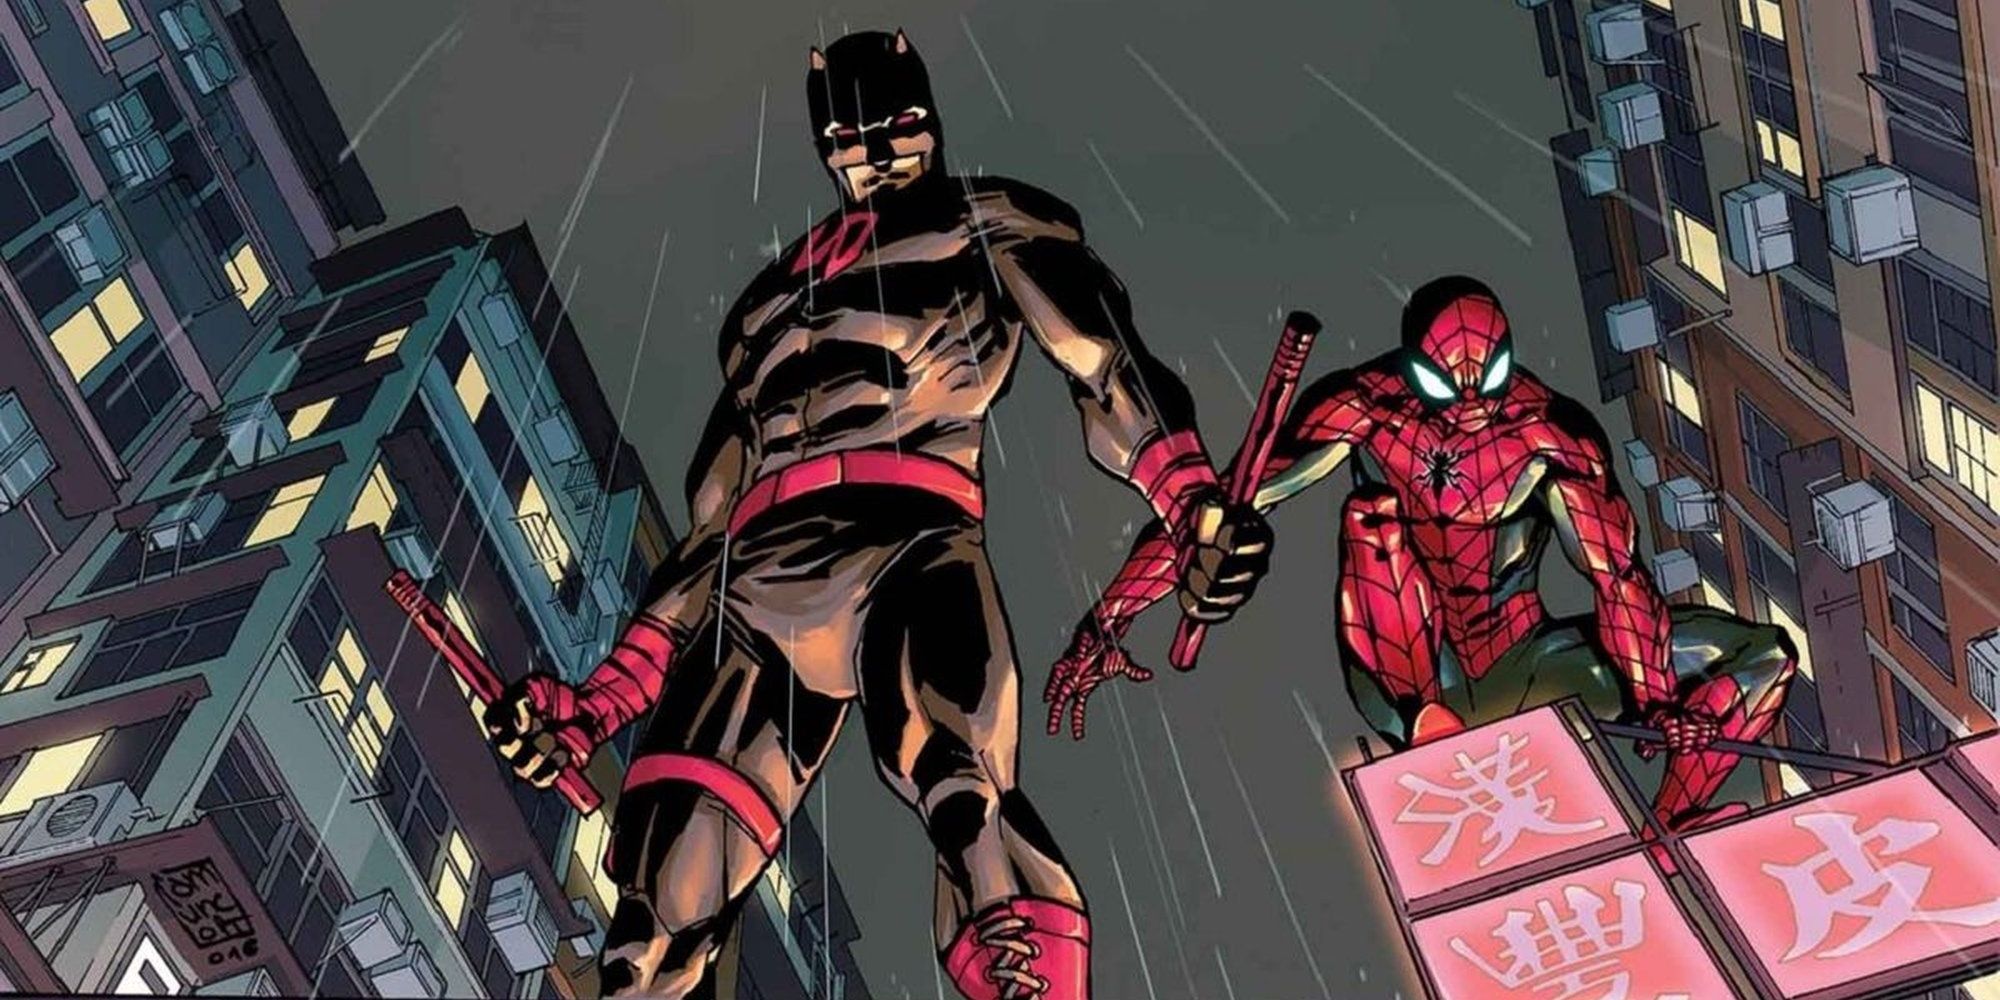 Spider-Man and Daredevil overlook the city from their perch.